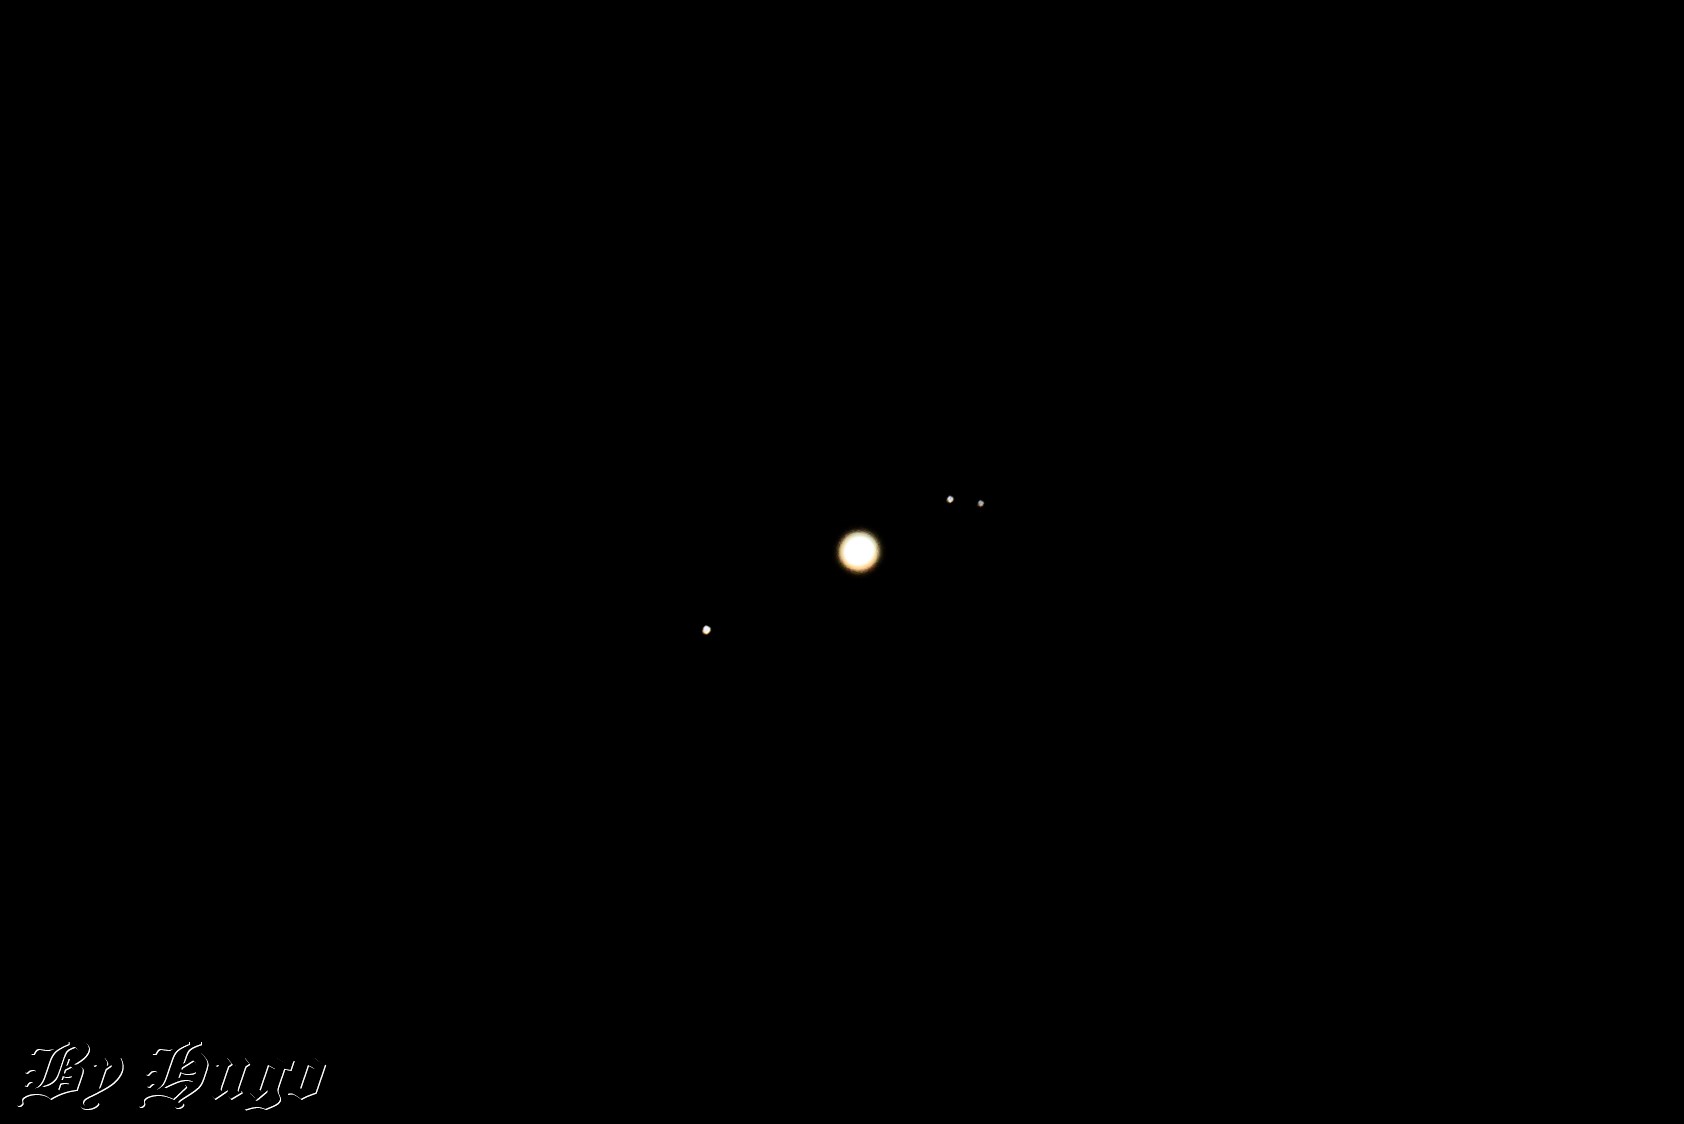 Jupiter and some of its moons...